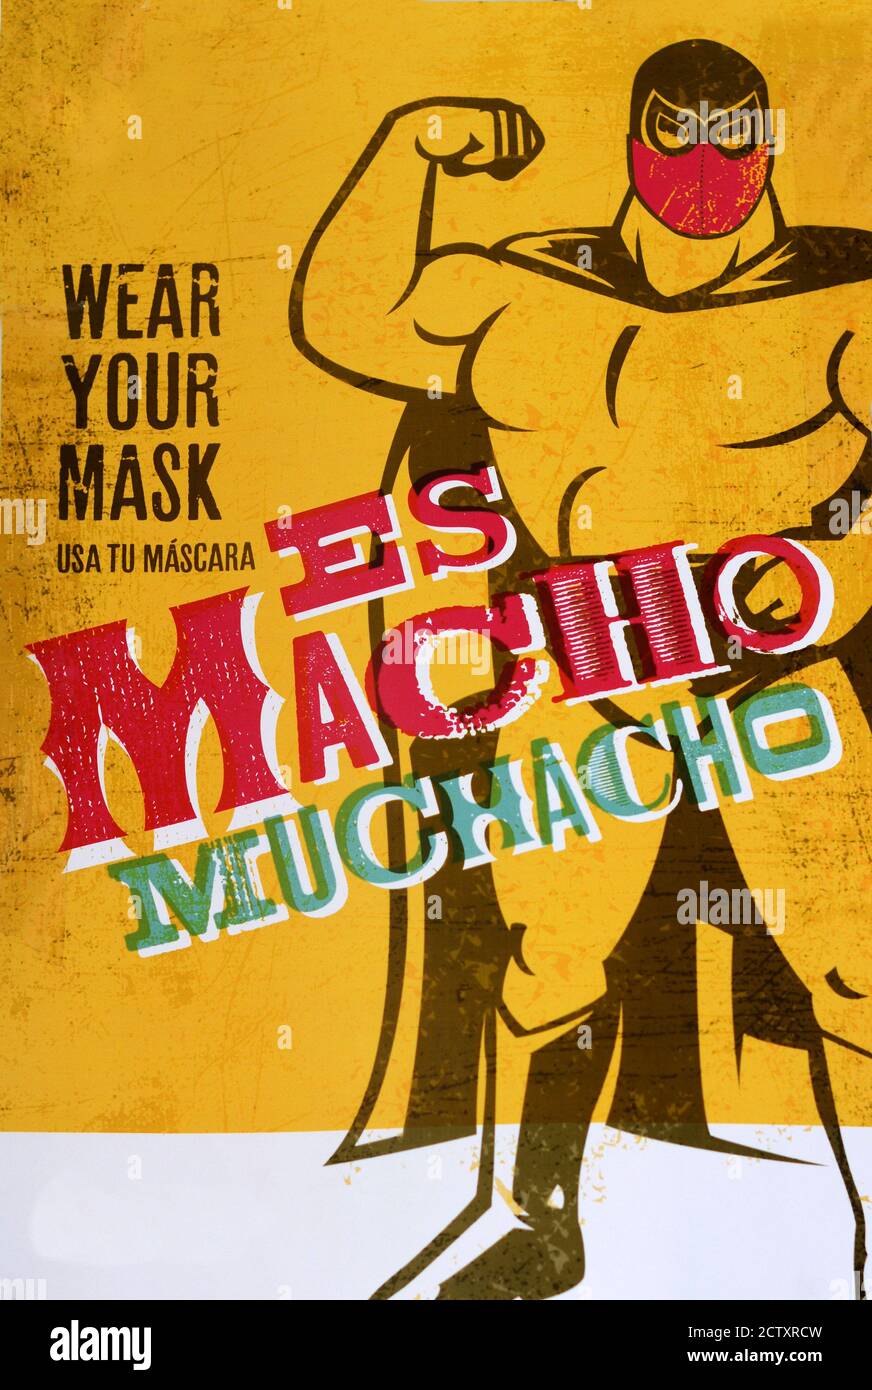 A poster encouraging men to wear a mask to prevent the spread of the coronavirus. Pictured is a masked Mexican wrestler, a Lucha Libre. Stock Photo